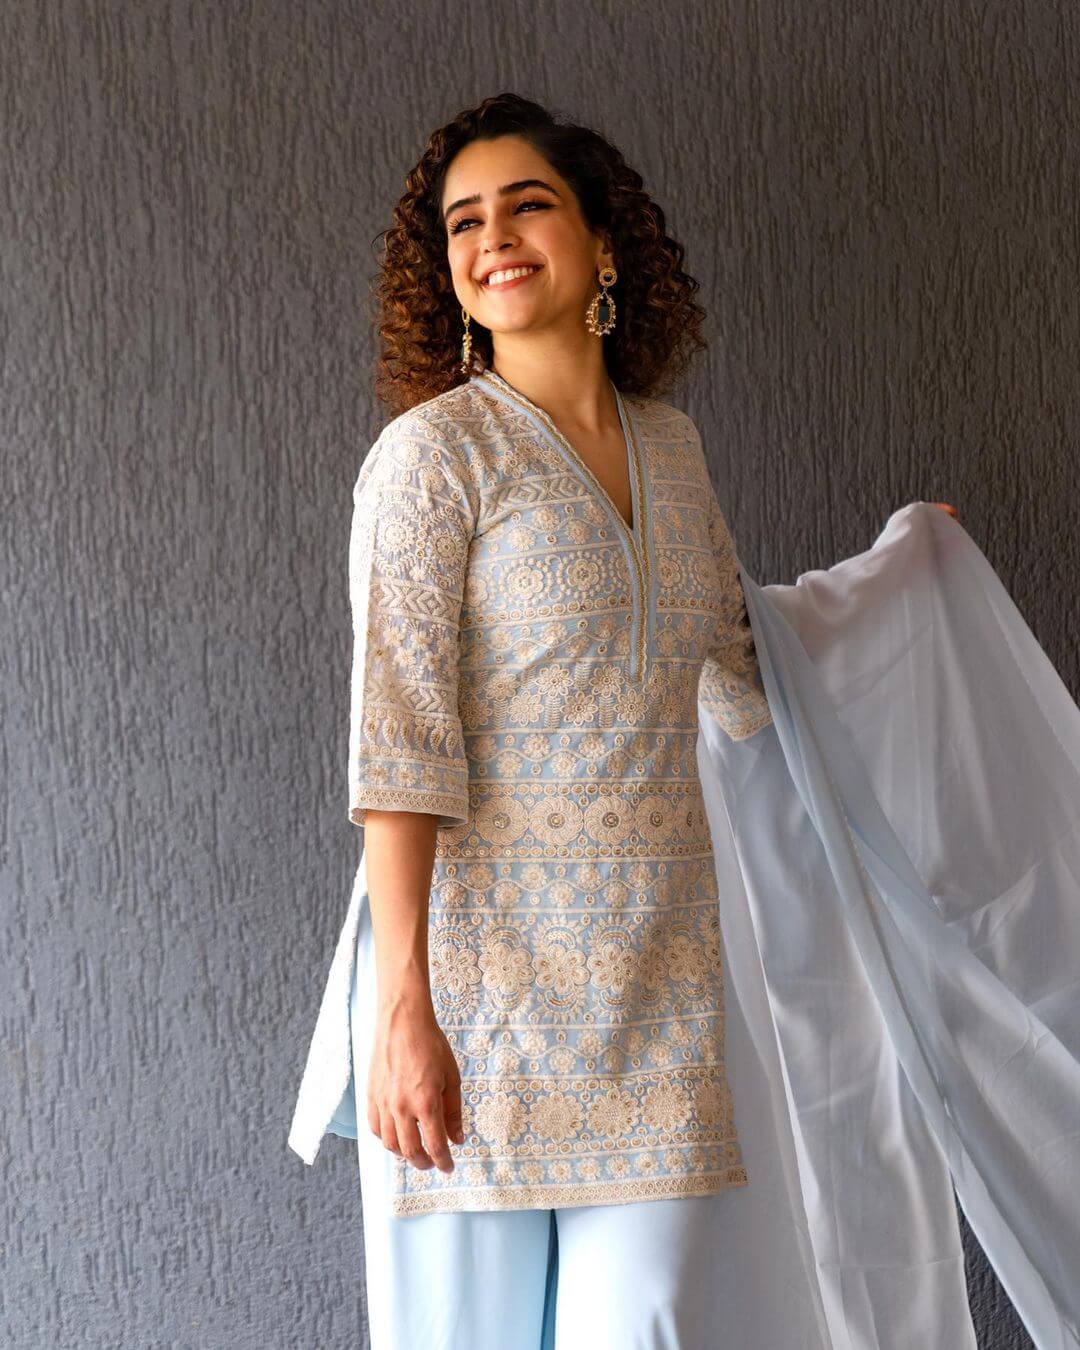 Sanya Malhotra | Ethnic Wear, Pretty Dresses, Fashion And Outfits Easy, Breezy In This Pastel Blue